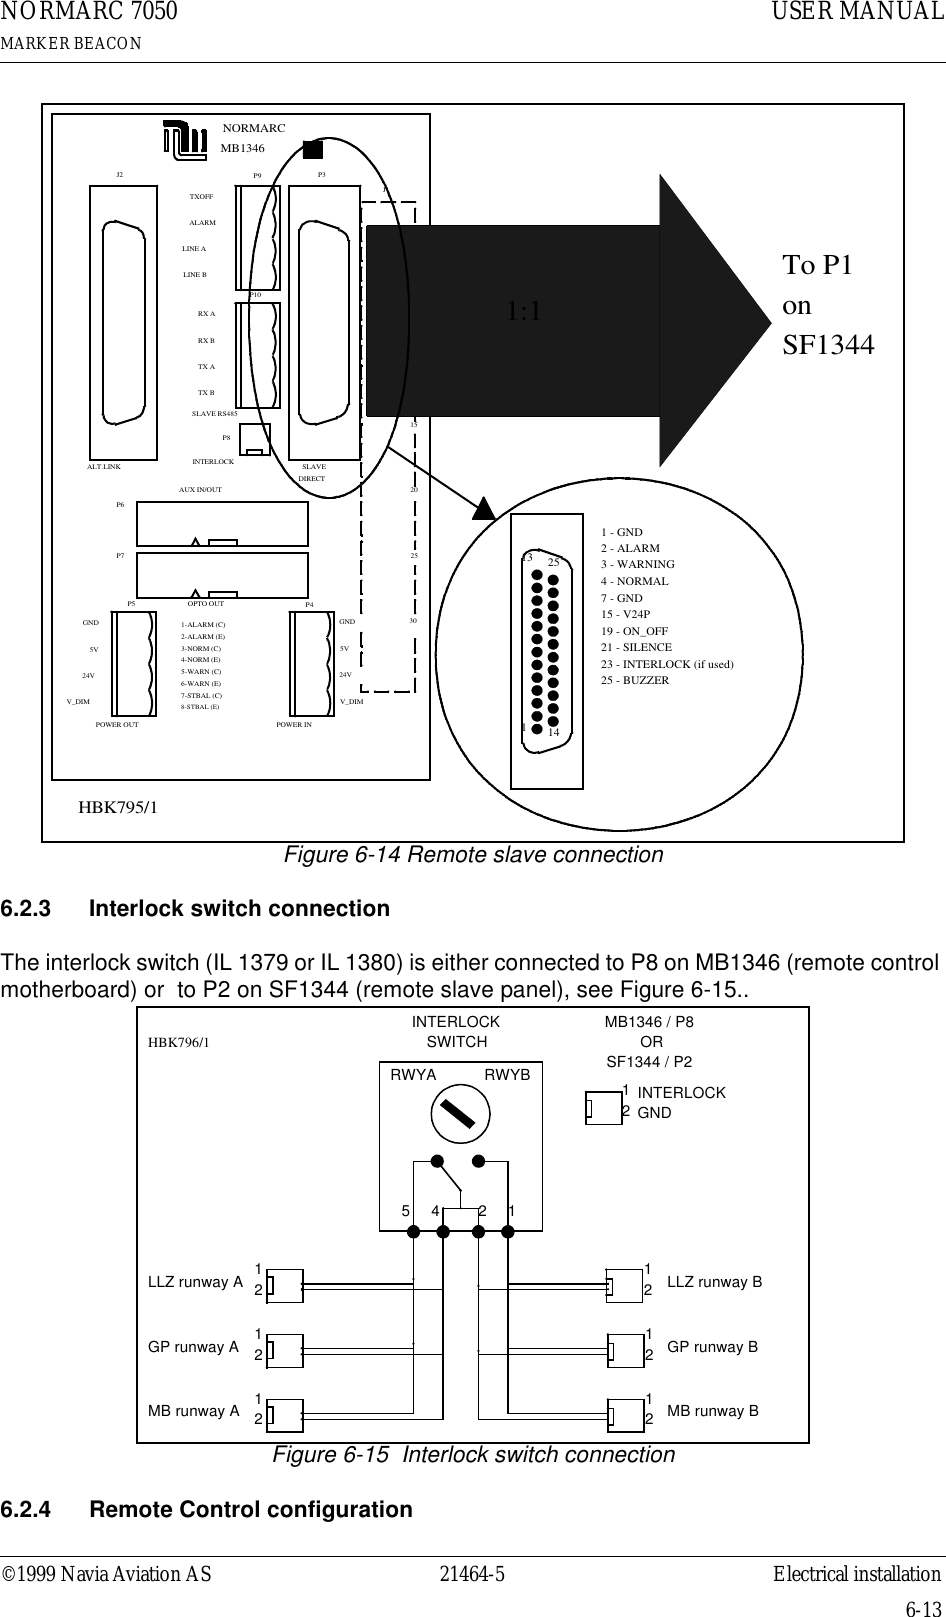 ©1999 Navia Aviation AS 21464-5 Electrical installationUSER MANUALNORMARC 7050MARKER BEACON6-13Figure 6-14 Remote slave connection6.2.3 Interlock switch connectionThe interlock switch (IL 1379 or IL 1380) is either connected to P8 on MB1346 (remote control motherboard) or  to P2 on SF1344 (remote slave panel), see Figure 6-15..Figure 6-15  Interlock switch connection6.2.4 Remote Control configurationJ2 P3P6P7P4P5P9P10P8NORMARCOPTO OUT2-ALARM (E)1-ALARM (C)4-NORM (E)5-WARN (C)6-WARN (E)7-STBAL (C)8-STBAL (E)3-NORM (C)GND5V24VV_DIMGND5V24VV_DIMPOWER OUT POWER INAUX IN/OUTSLAVEDIRECTINTERLOCKTXOFFALARMLINE ALINE BRX ARX BTX ATX BSLAVE RS485J1ABC153020251510ALT.LINKMB13461:1To P1 onSF134411314251 - GND2 - ALARM3 - WARNING4 - NORMAL7 - GND15 - V24P19 - ON_OFF21 - SILENCE23 - INTERLOCK (if used)25 - BUZZERHBK795/112MB1346 / P8ORSF1344 / P2INTERLOCK SWITCHRWYA RWYB121212INTERLOCKGND1254 21LLZ runway AGP runway ALLZ runway BGP runway B1212MB runway A MB runway BHBK796/1